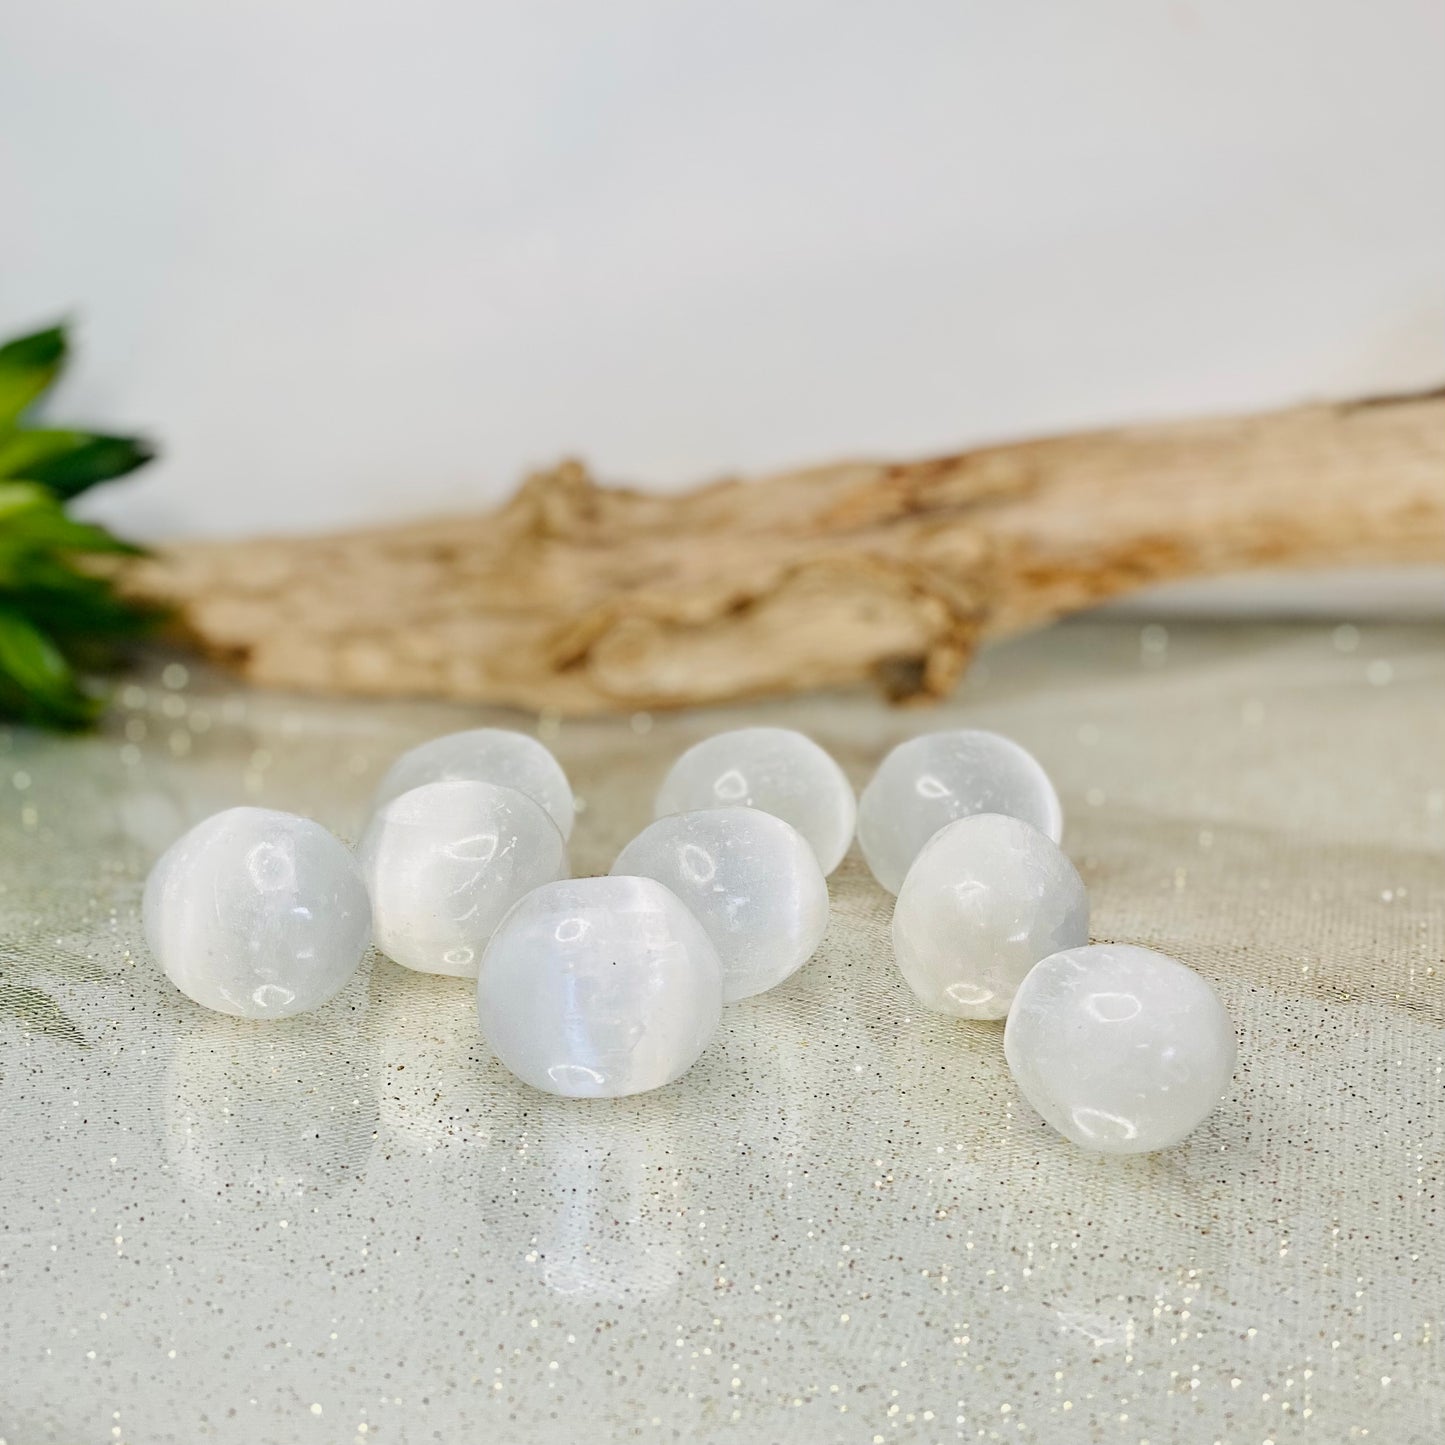 Selenite Tumbled Crystals: Radiant Purity in Every Stone